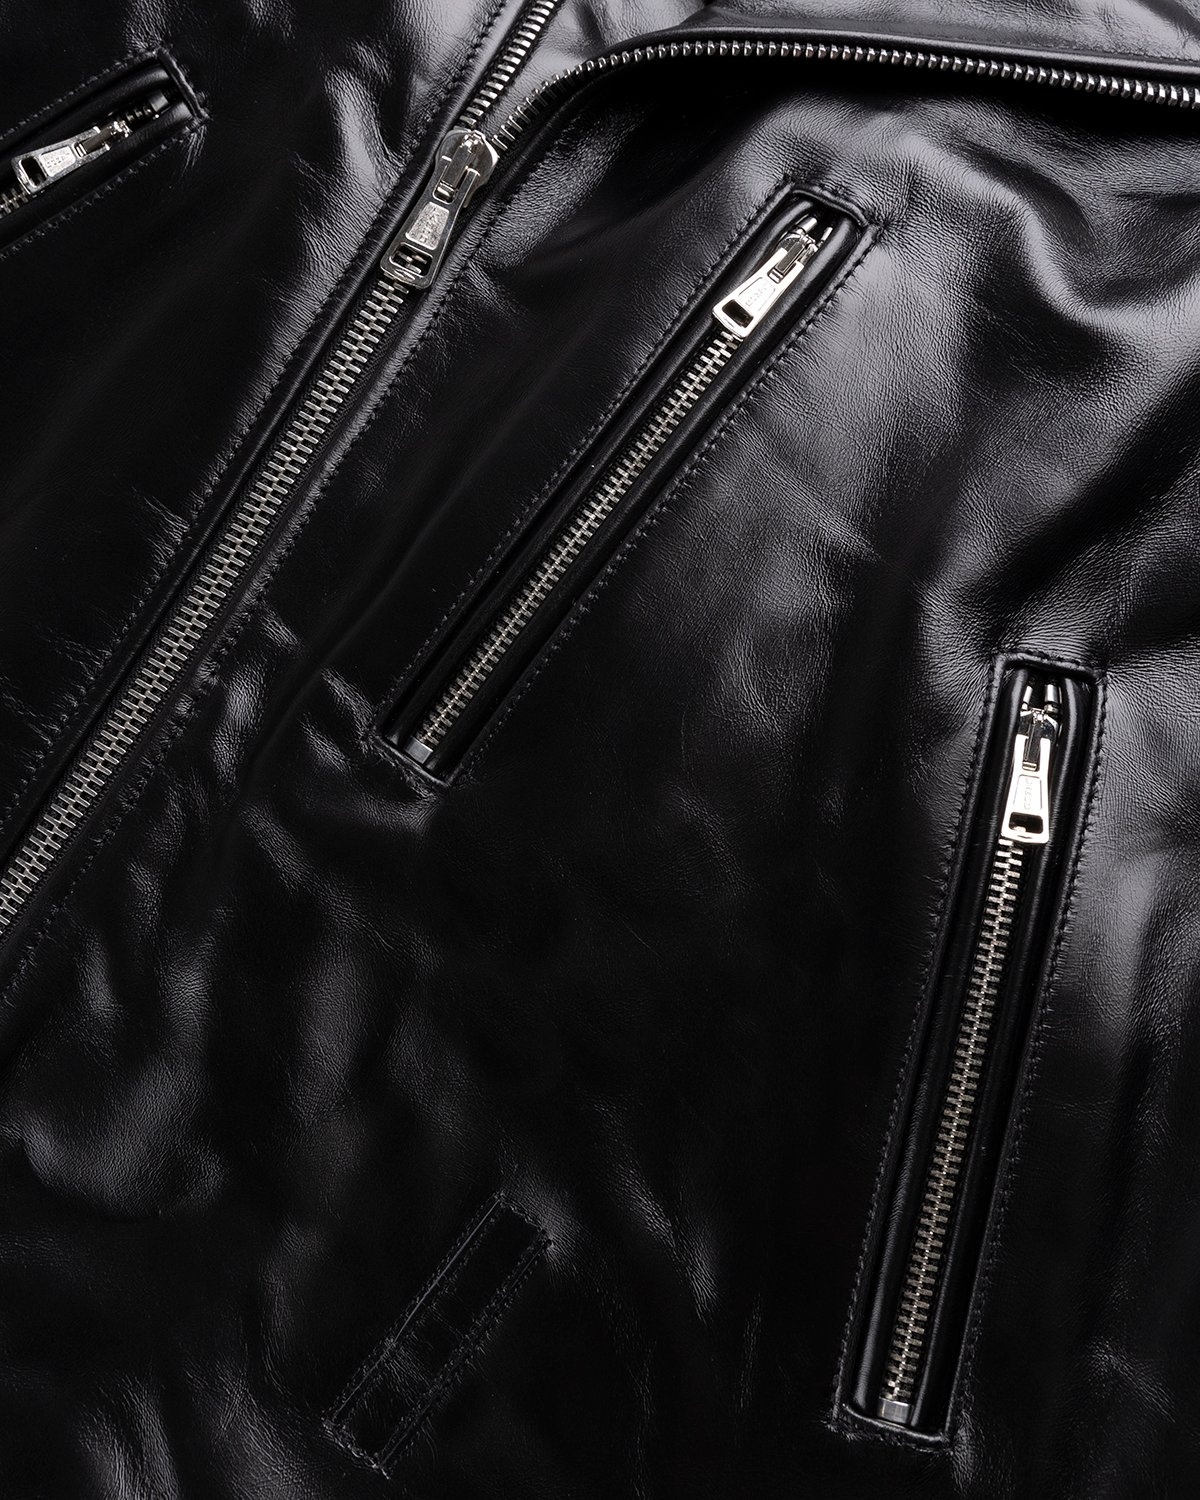 Our Legacy – Hellraiser Leather Jacket Aamon Black - Outerwear - Black - Image 4